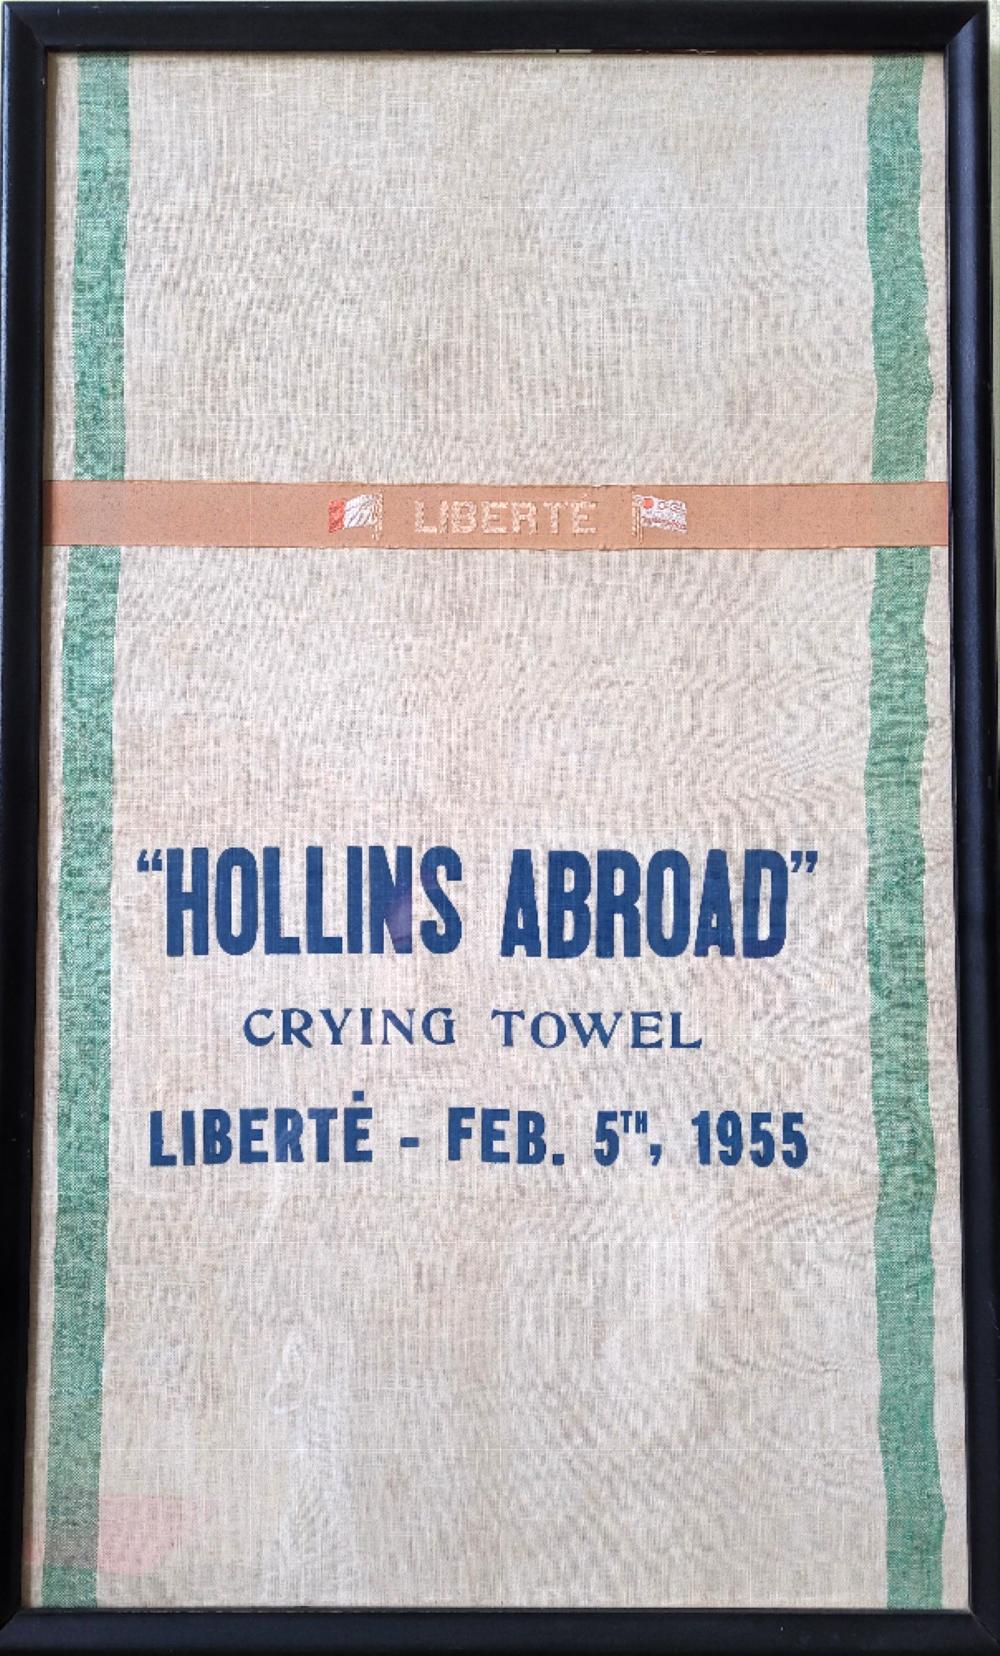 1955 Study Abroad Crying towel